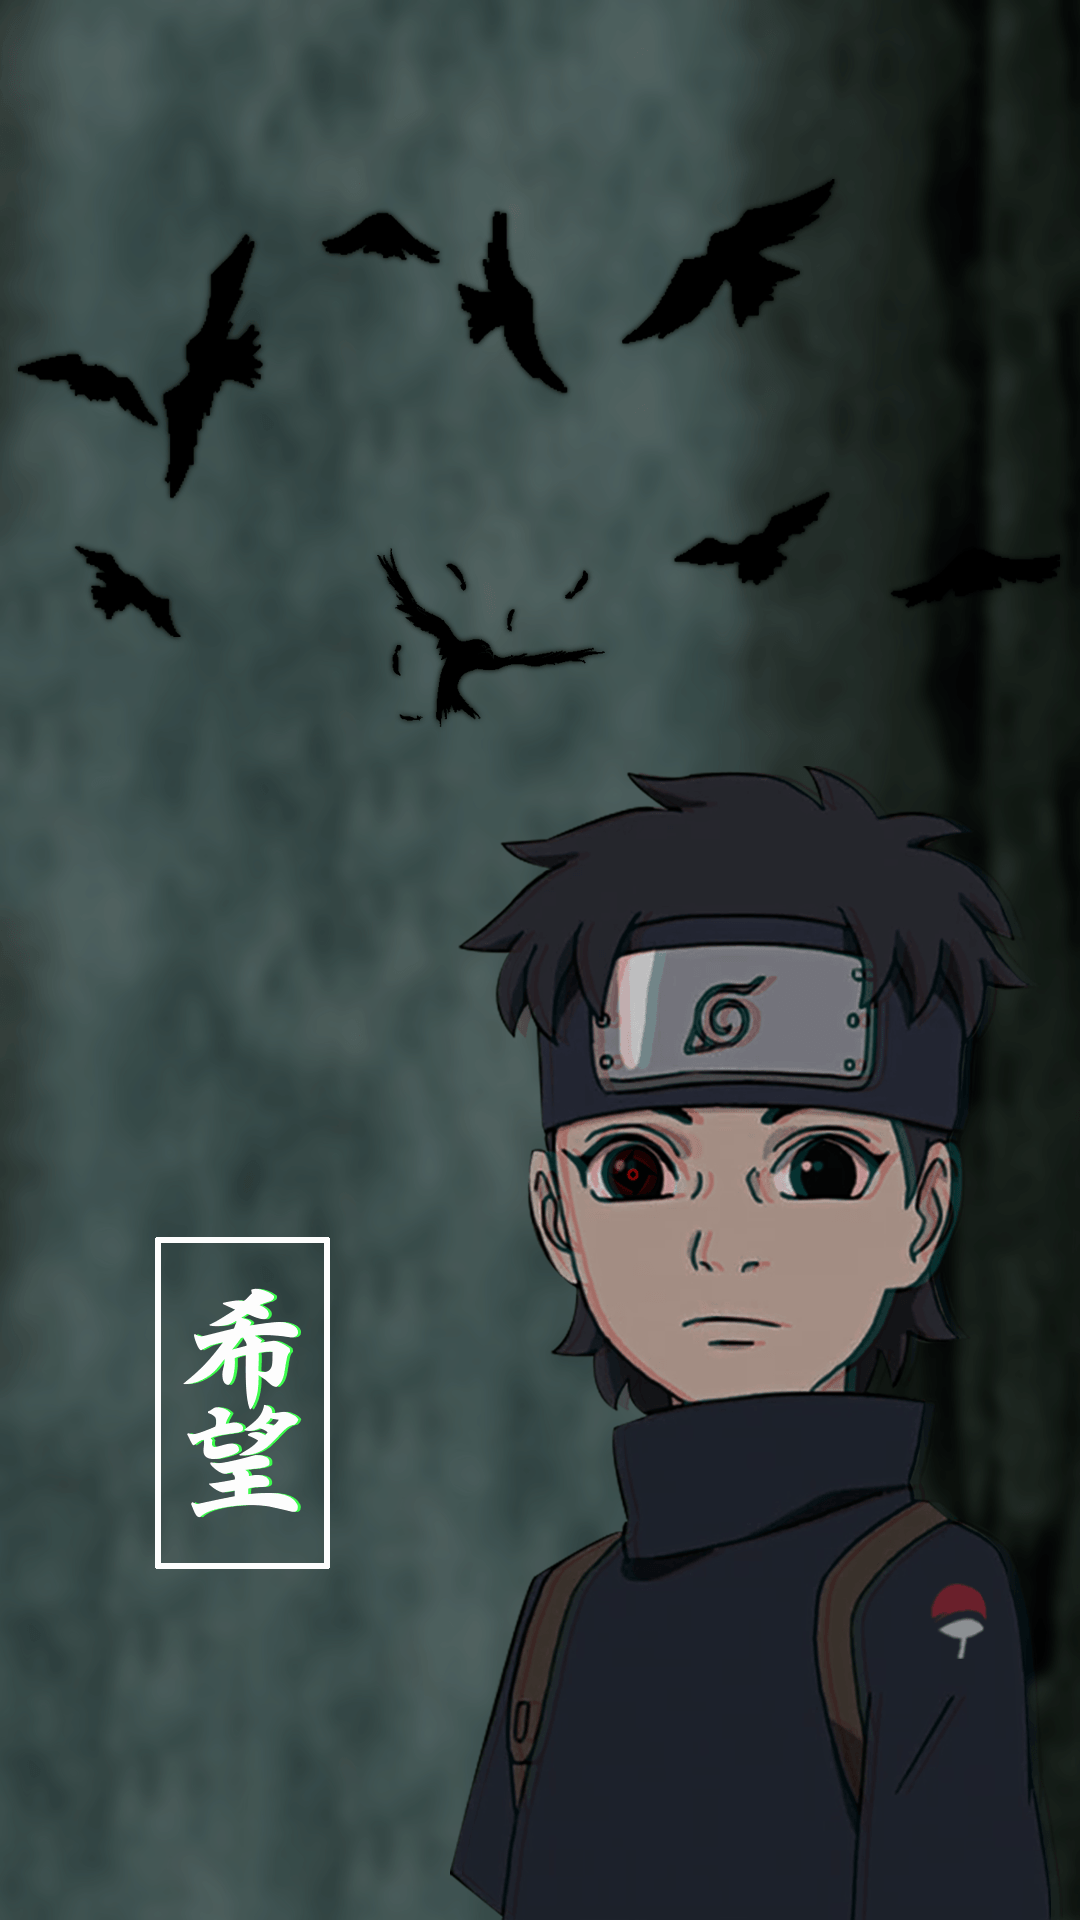 Took a while but here's a Shisui wallpapers : Naruto